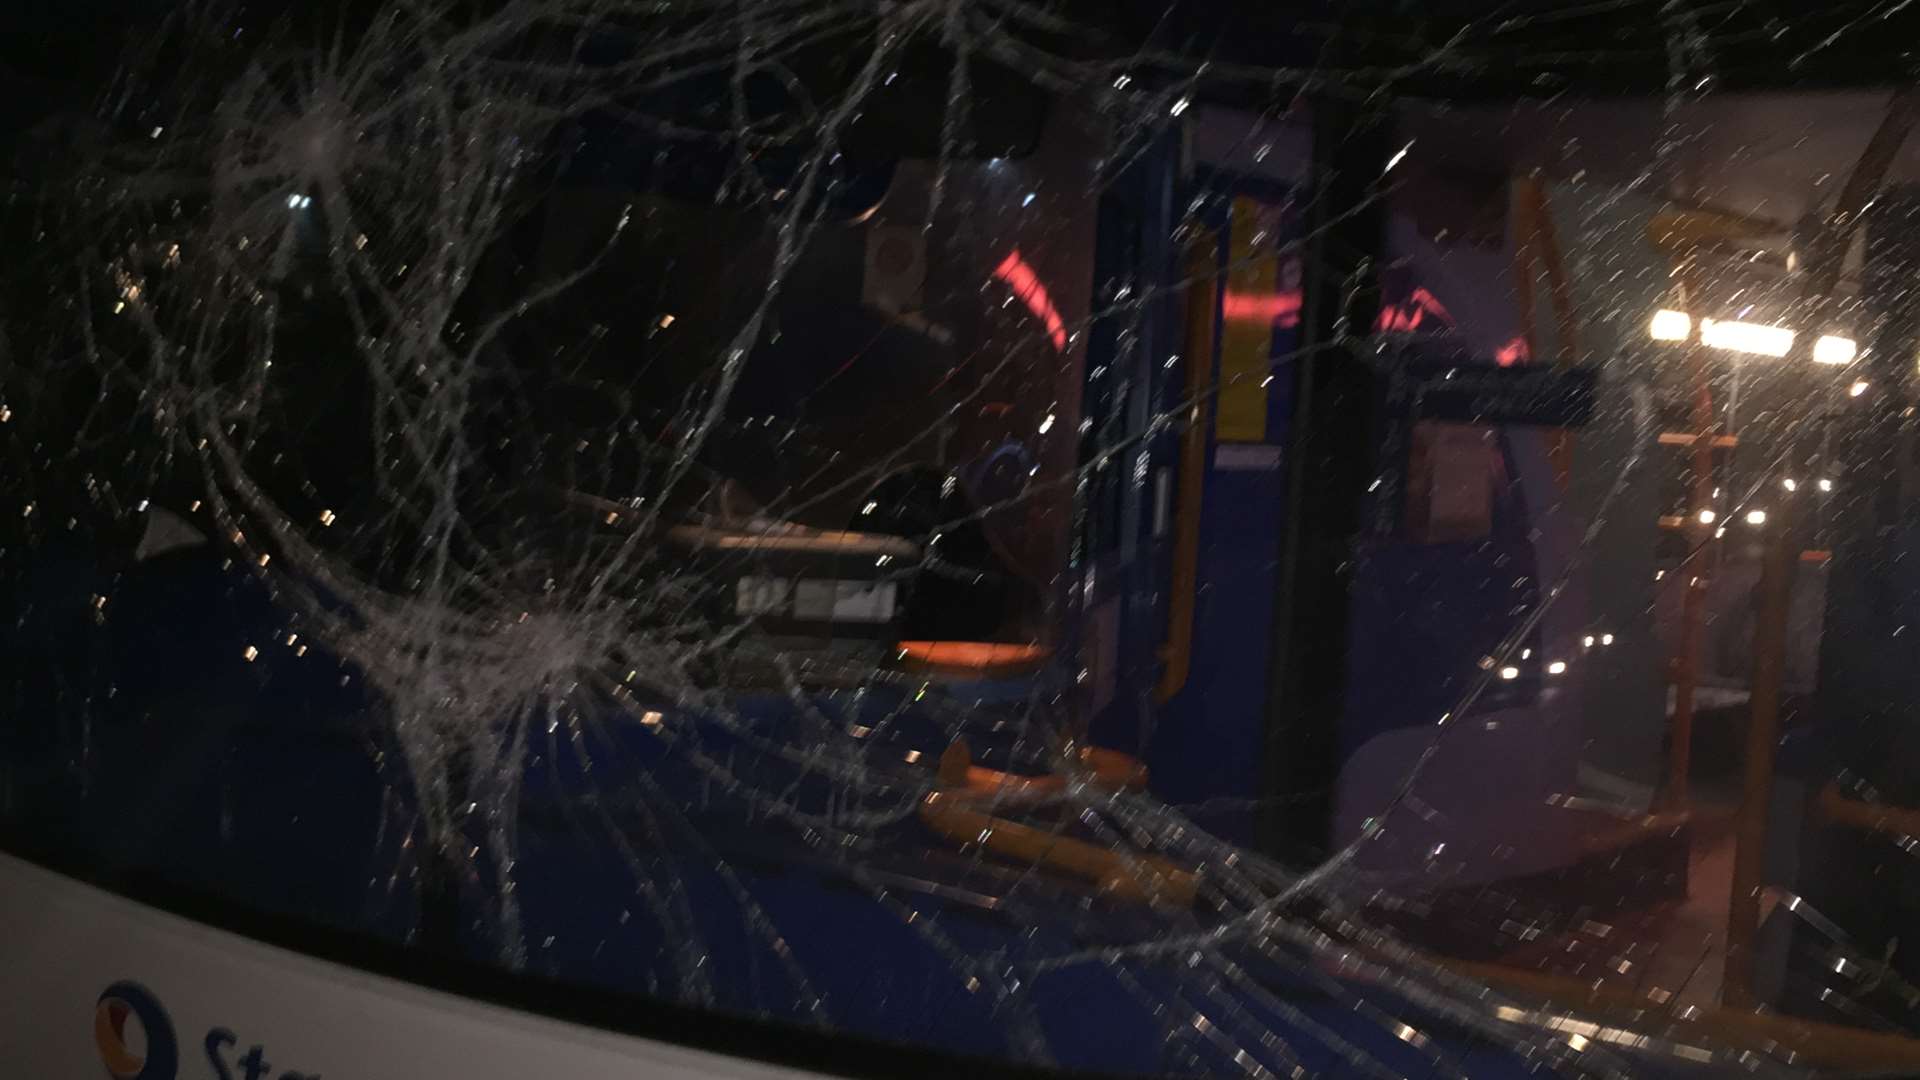 The windscreen of the bus was completely shattered. Pic: Ellis Holt